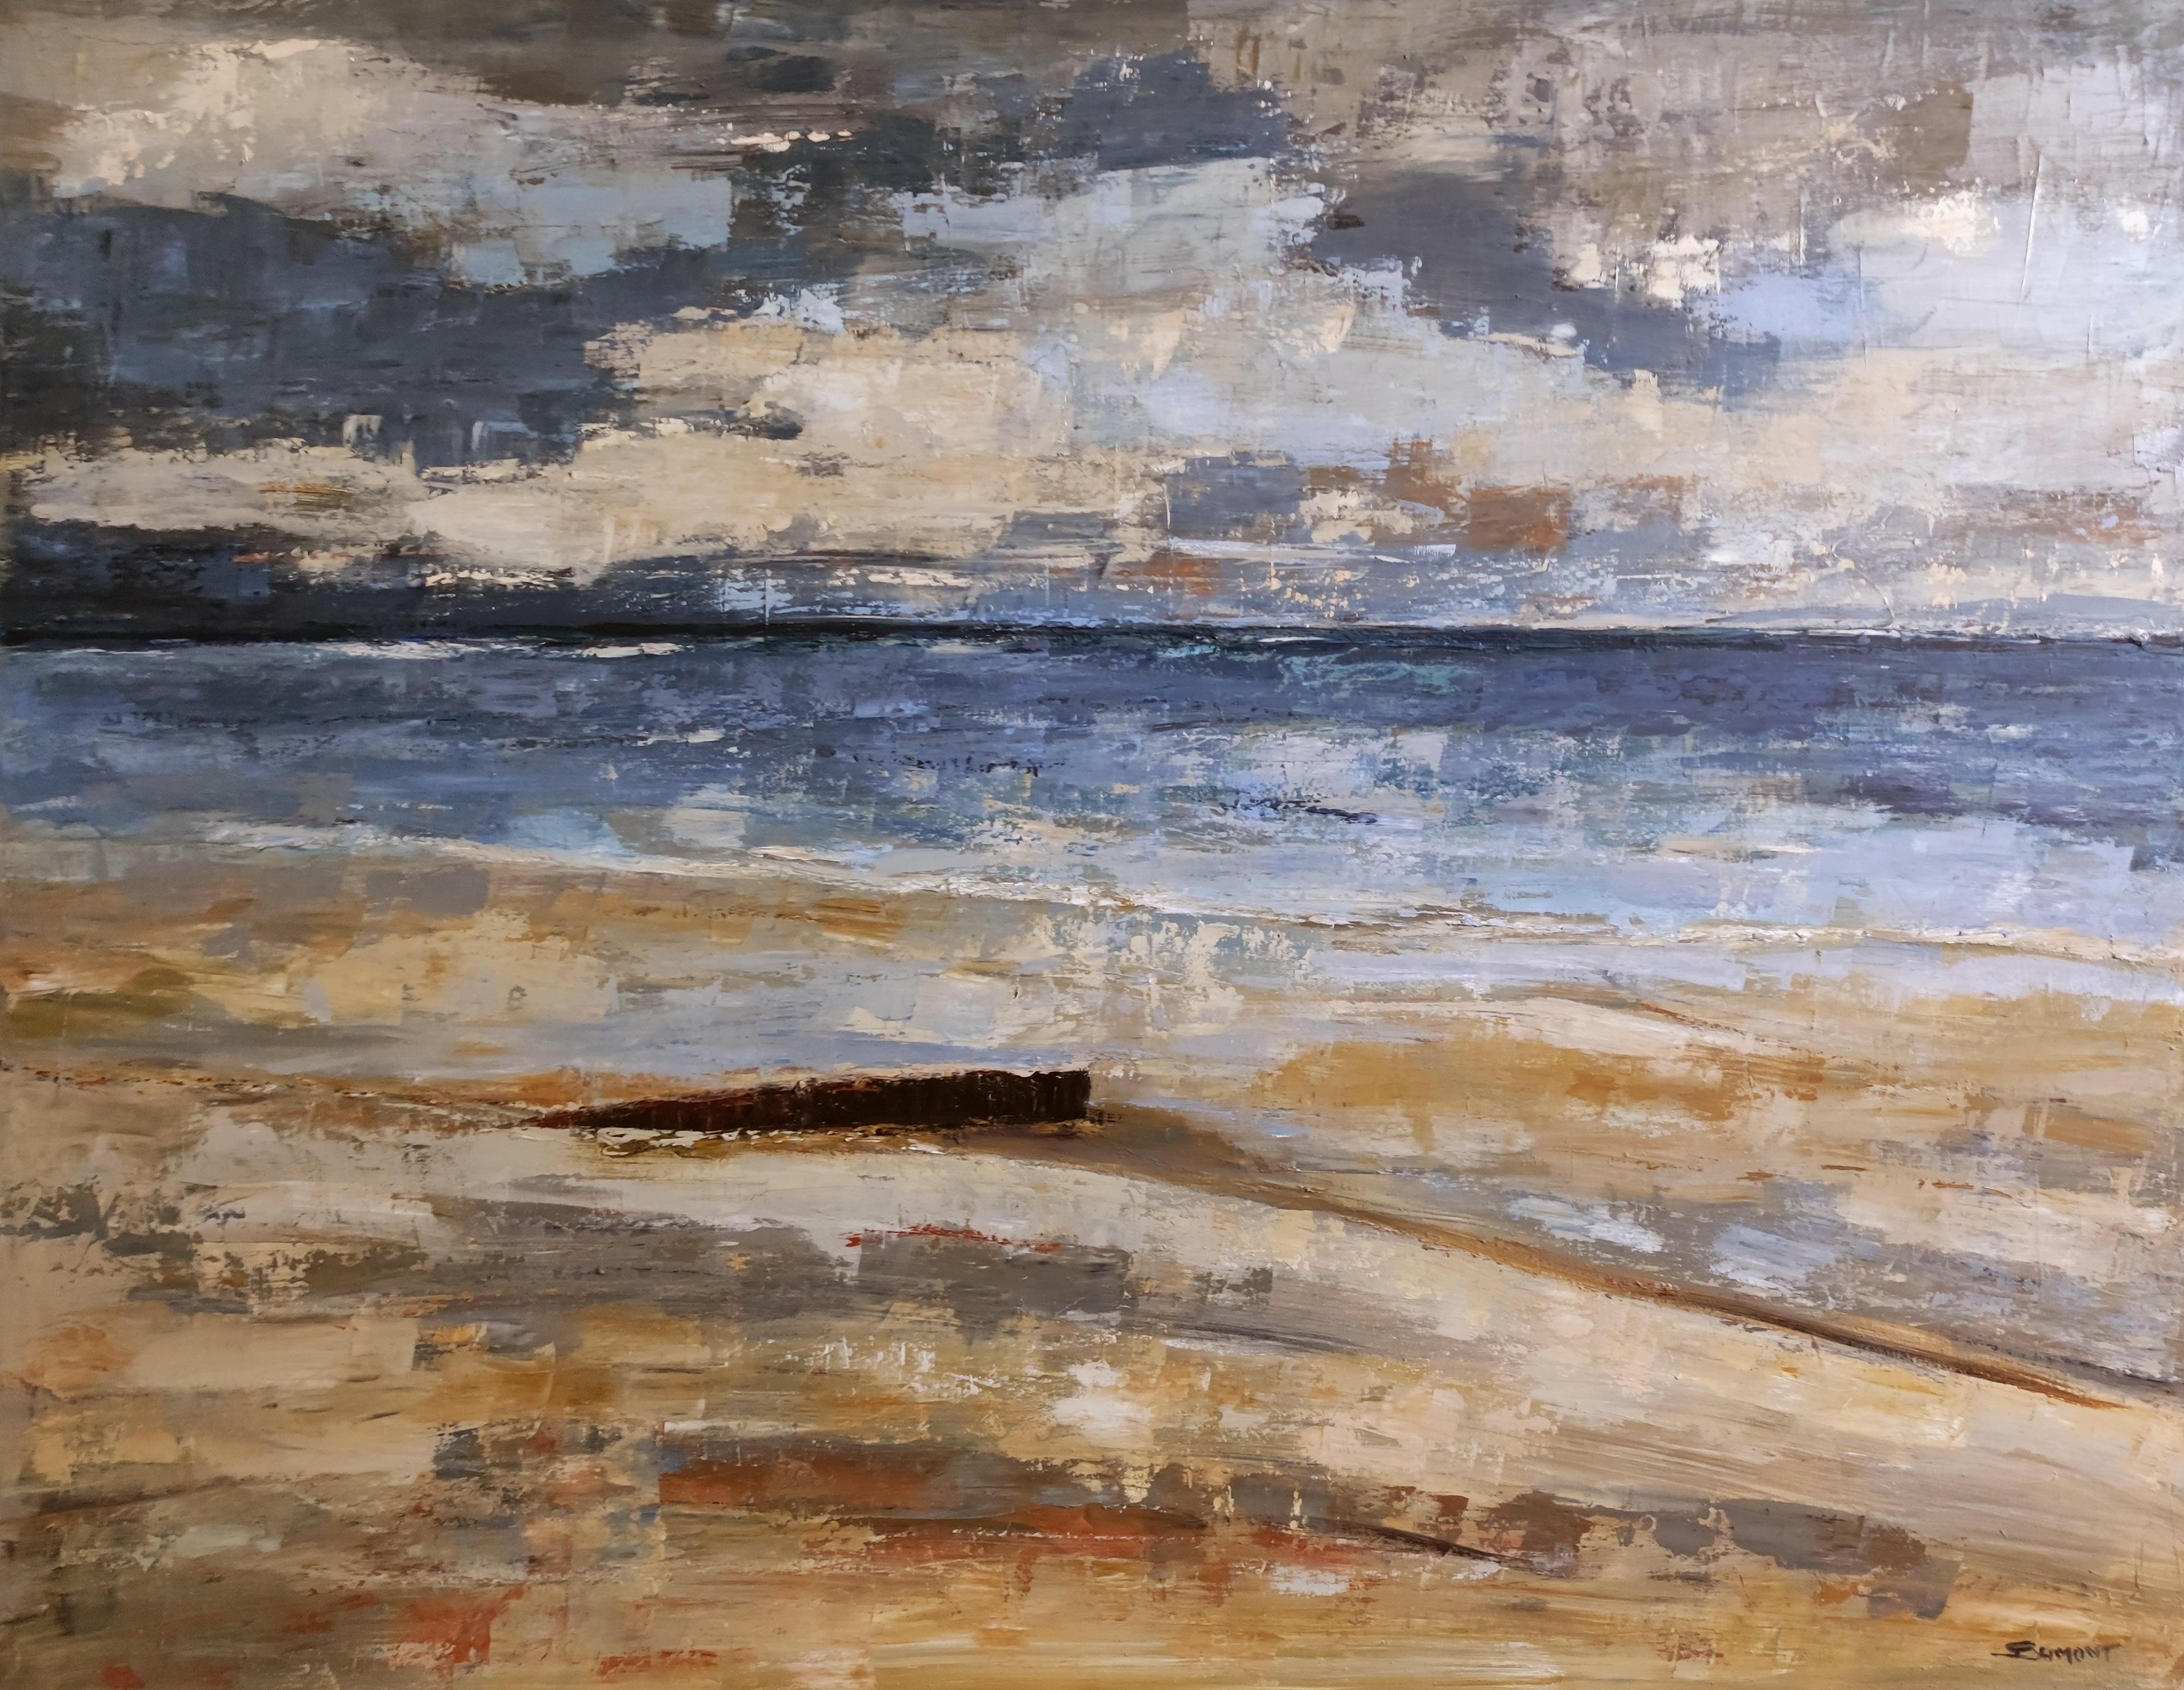 SOPHIE DUMONT Abstract Painting - Beach, Seaside, Semi Abstract, Oil on canvas, texture, Sky, Contemporary? France